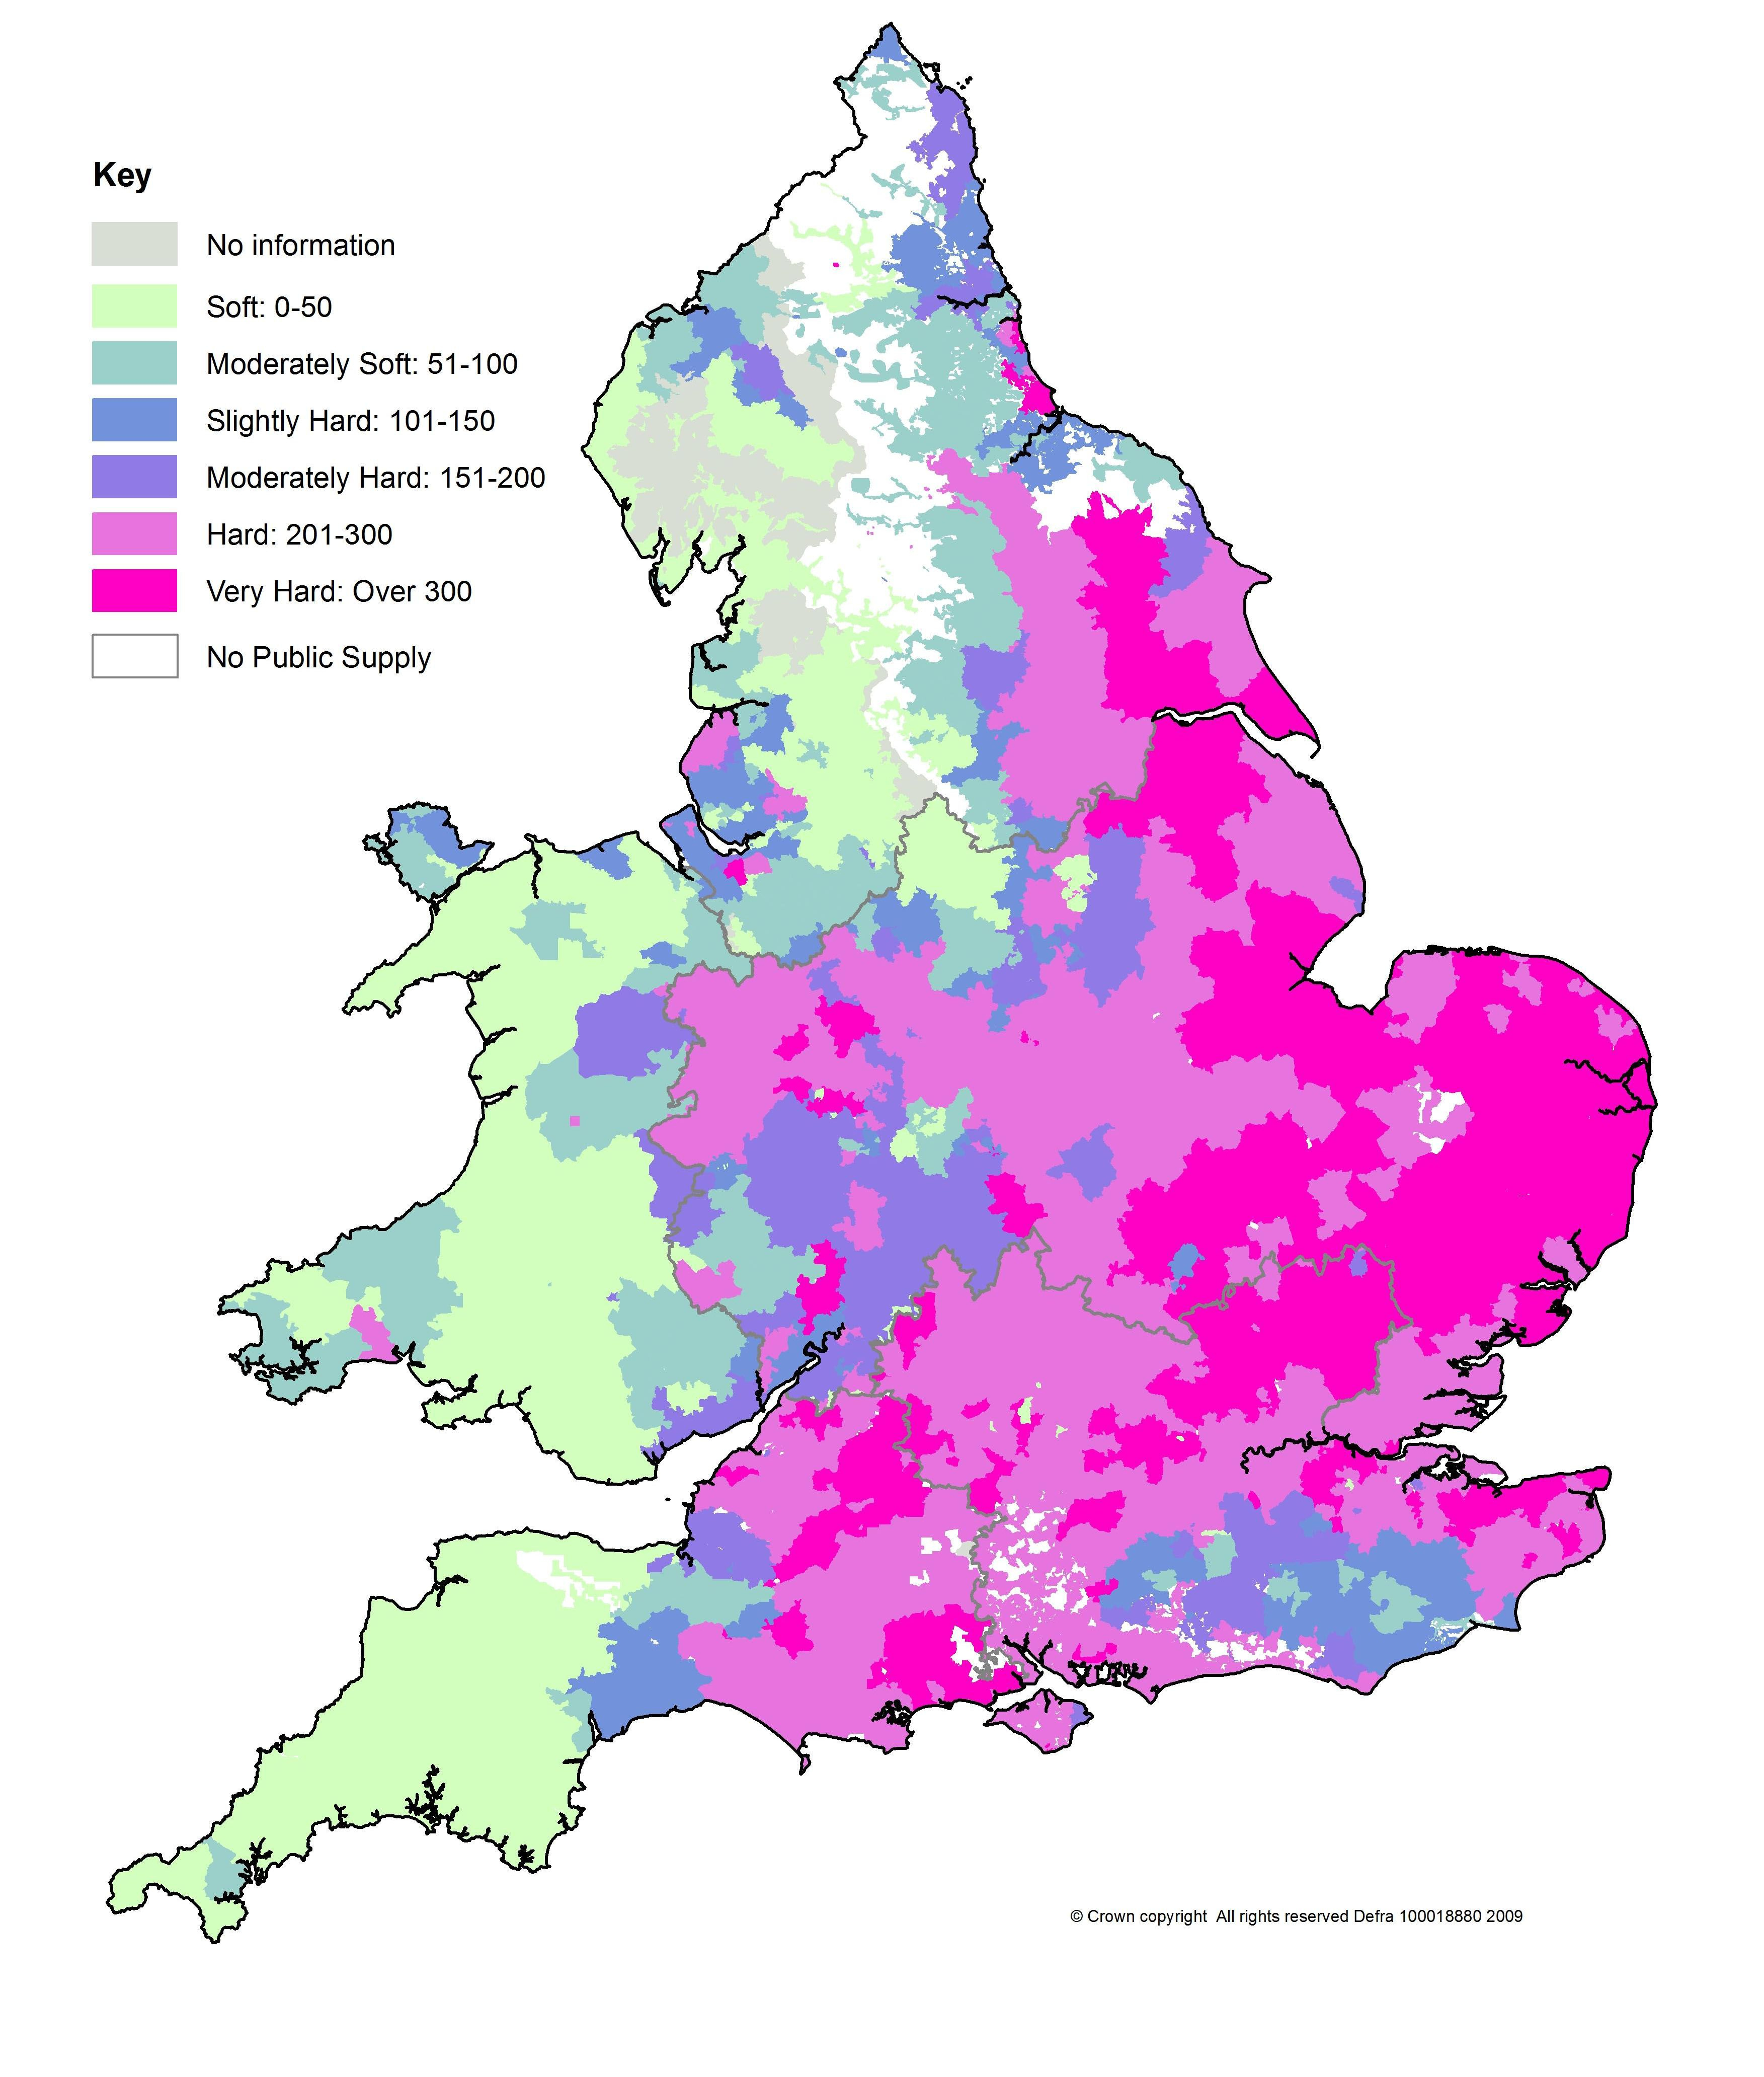 Water Hardness Areas In England And Wales | Maps | Pinterest | Map - Florida Water Hardness Map